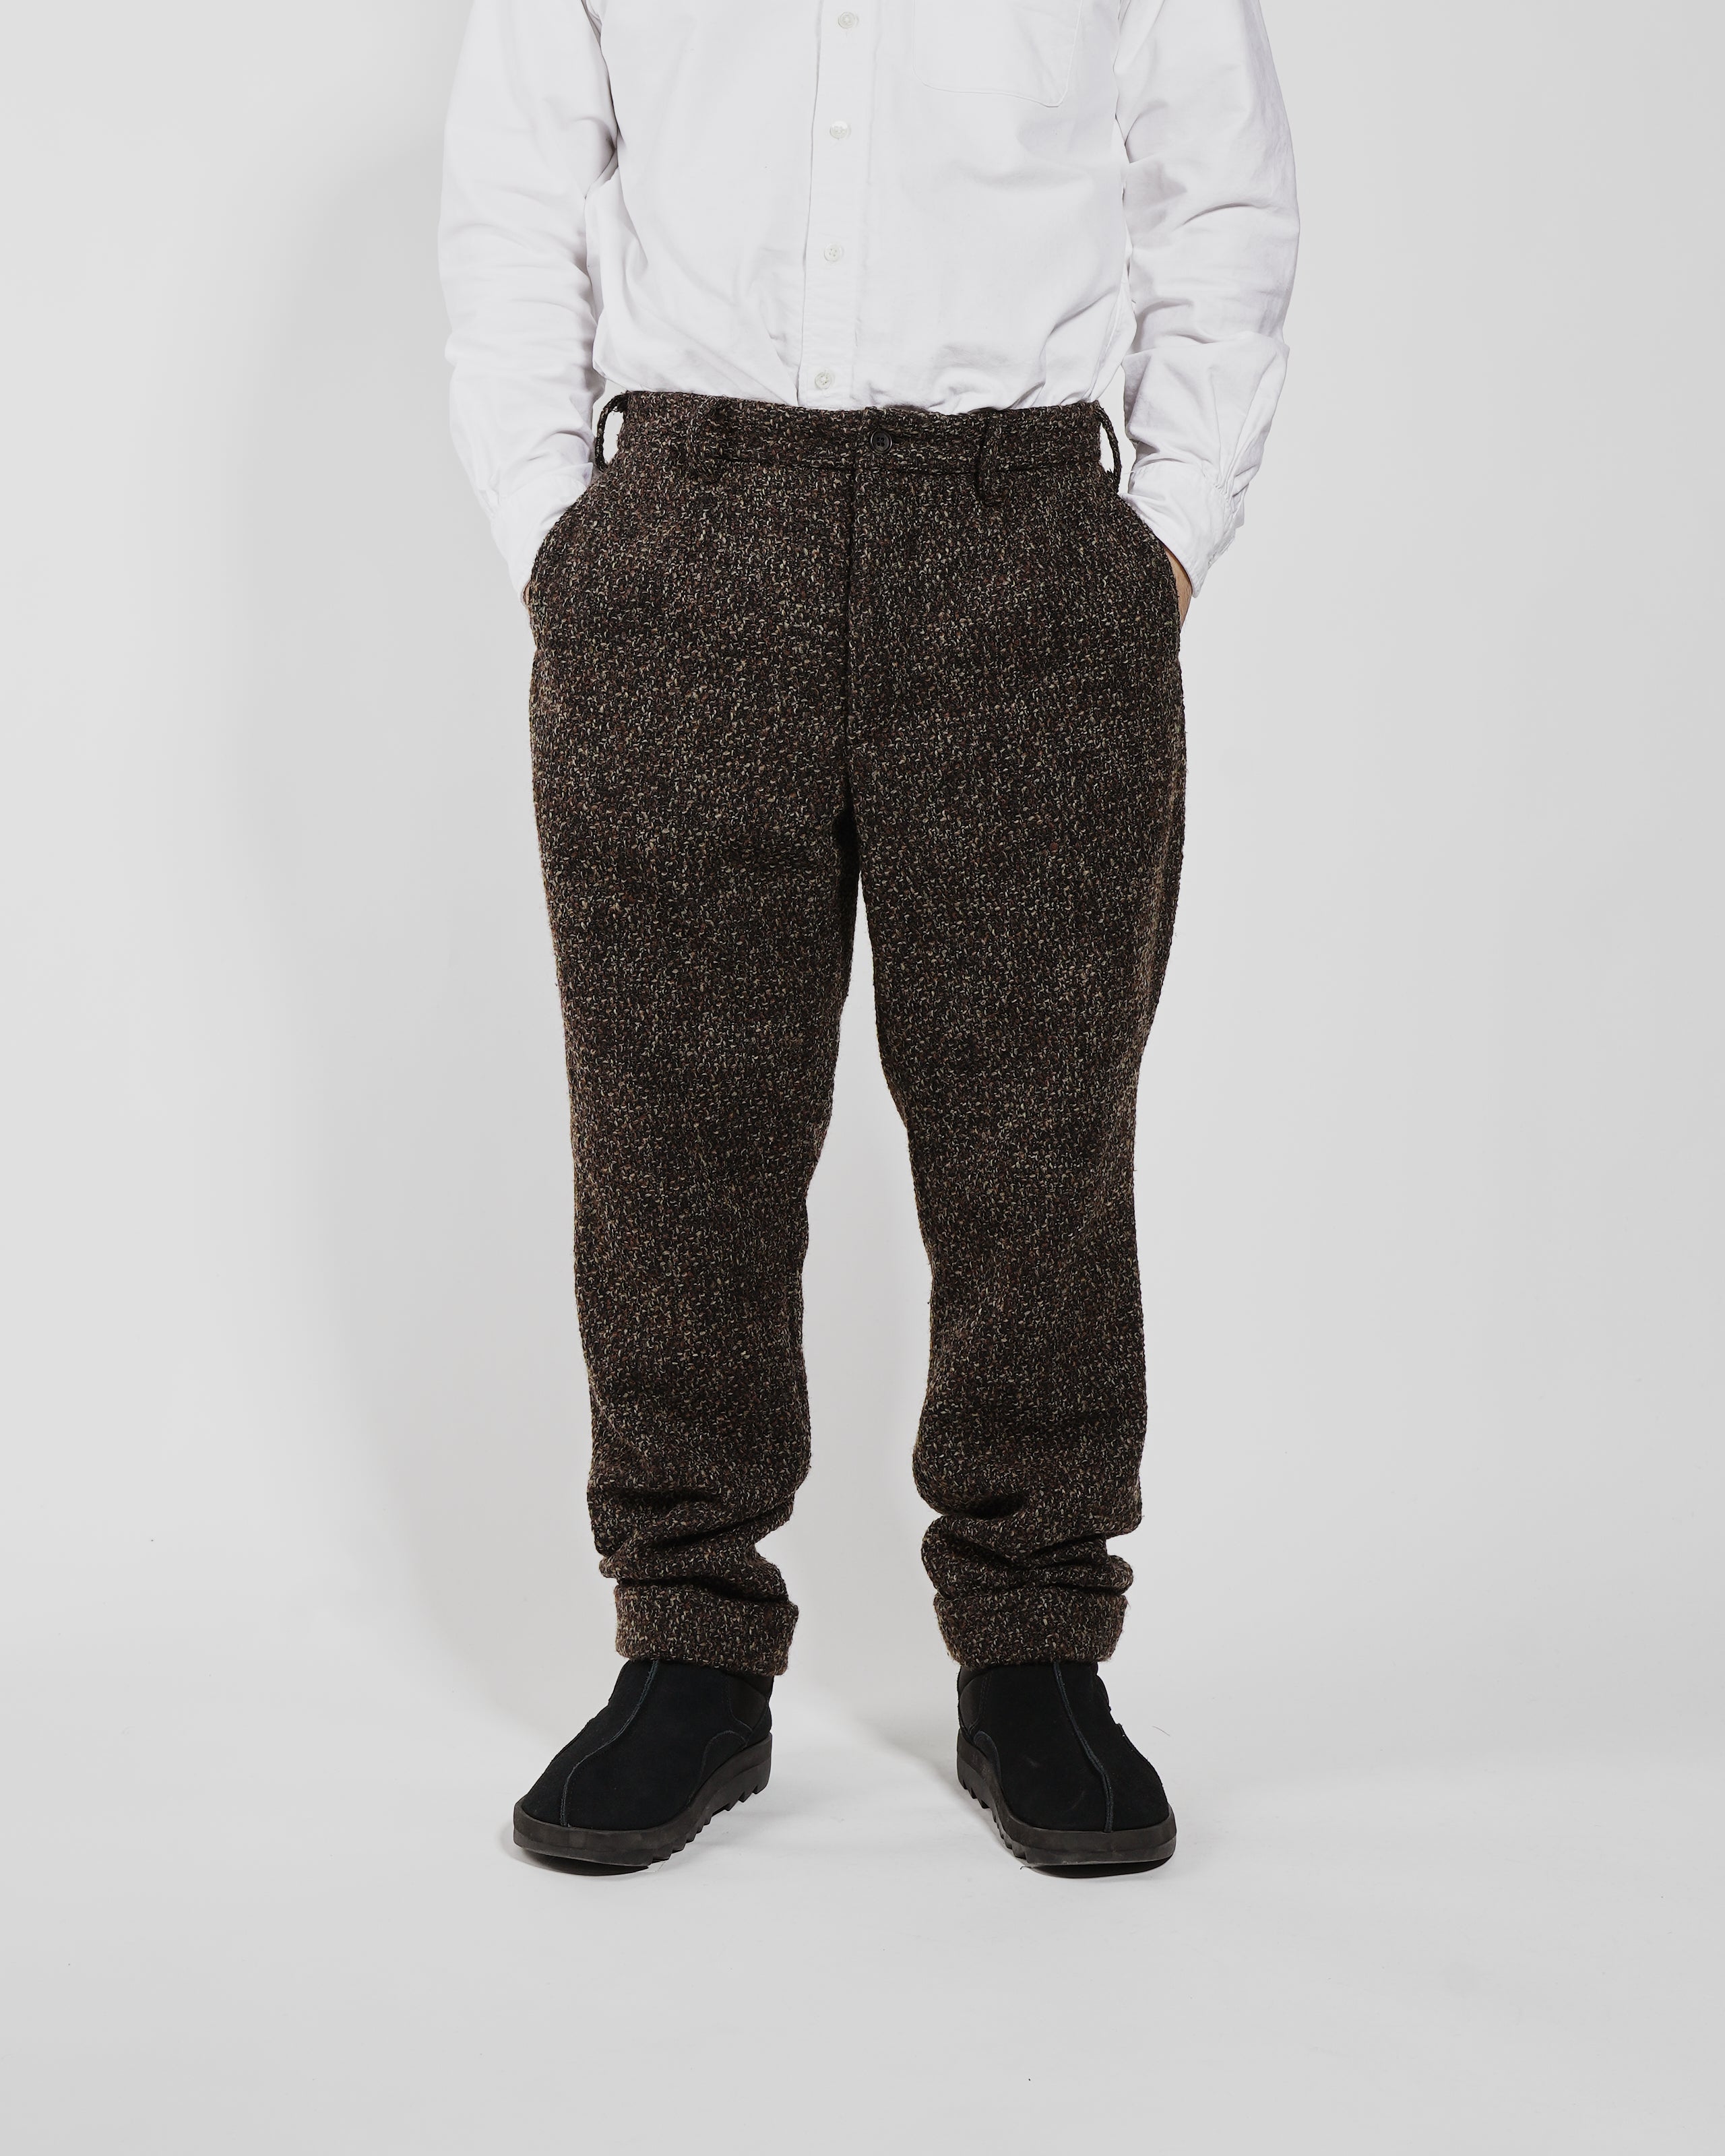 Andover Pant   Dark Brown Polyester Wool Tweed   Nepenthes New York